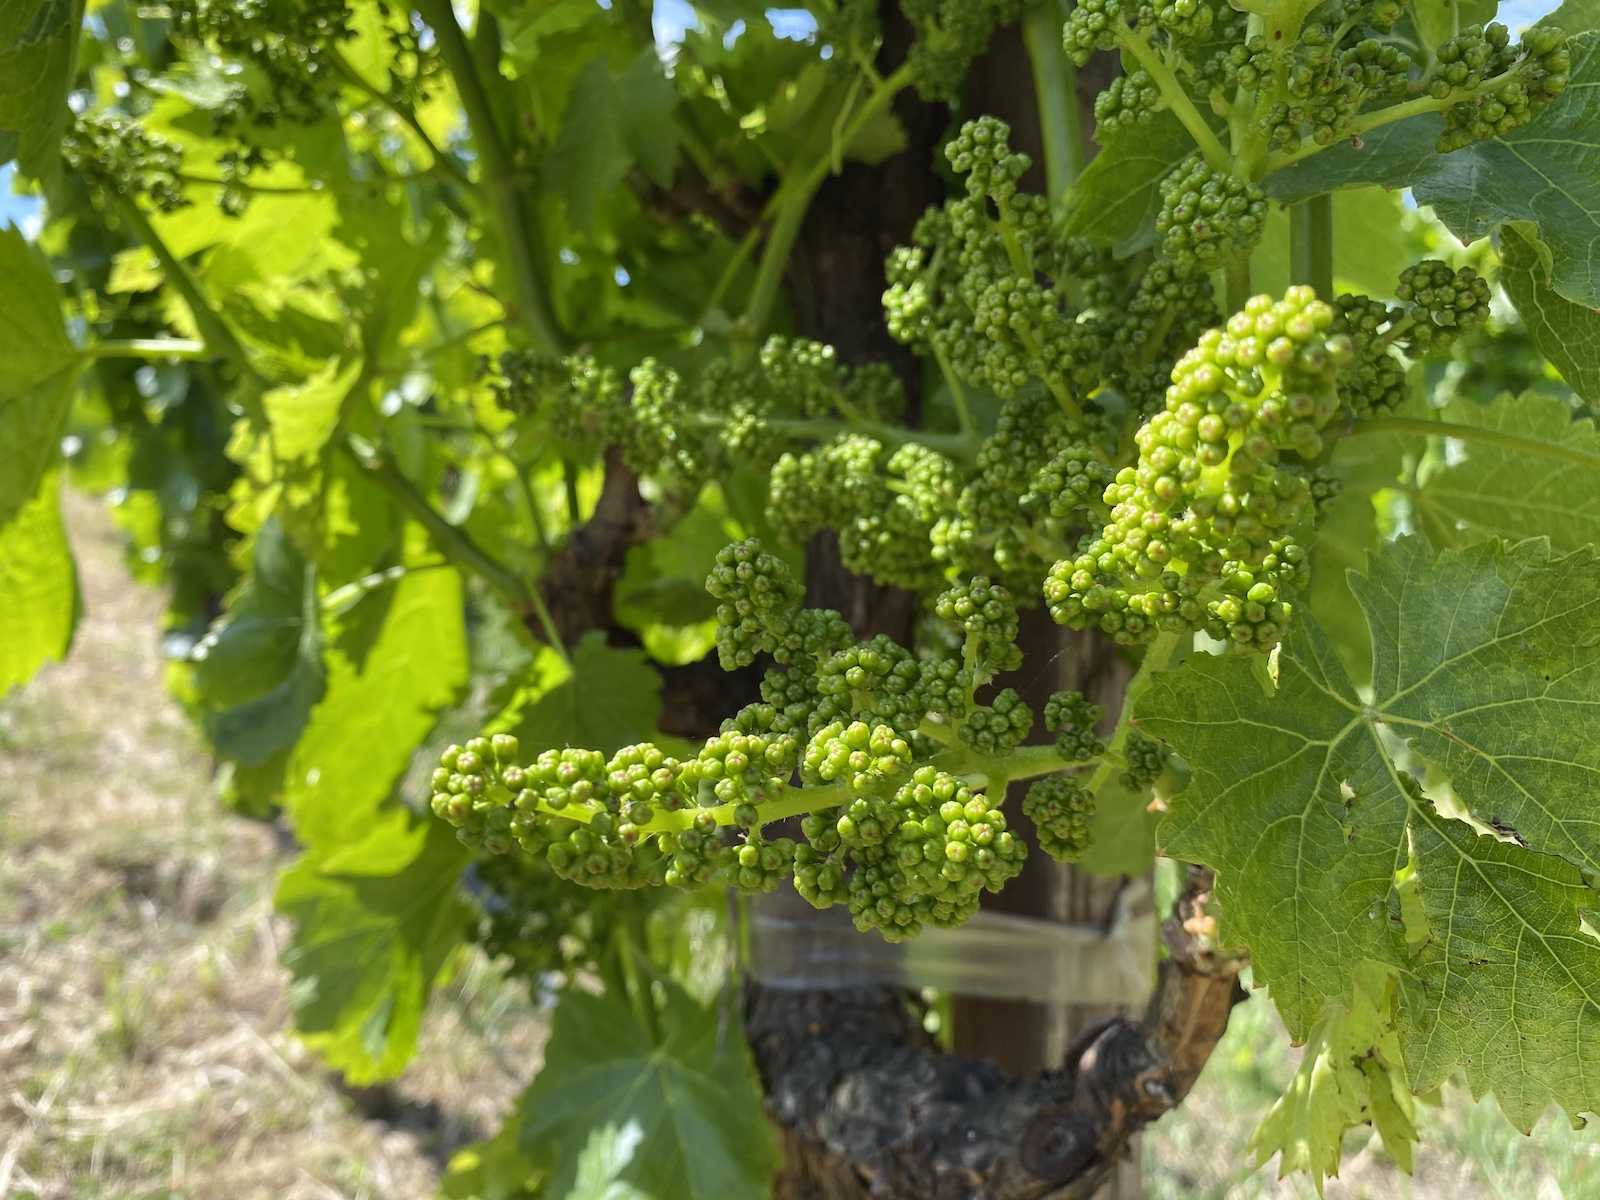 An image of green grape flower clusters just prior to blossoming.